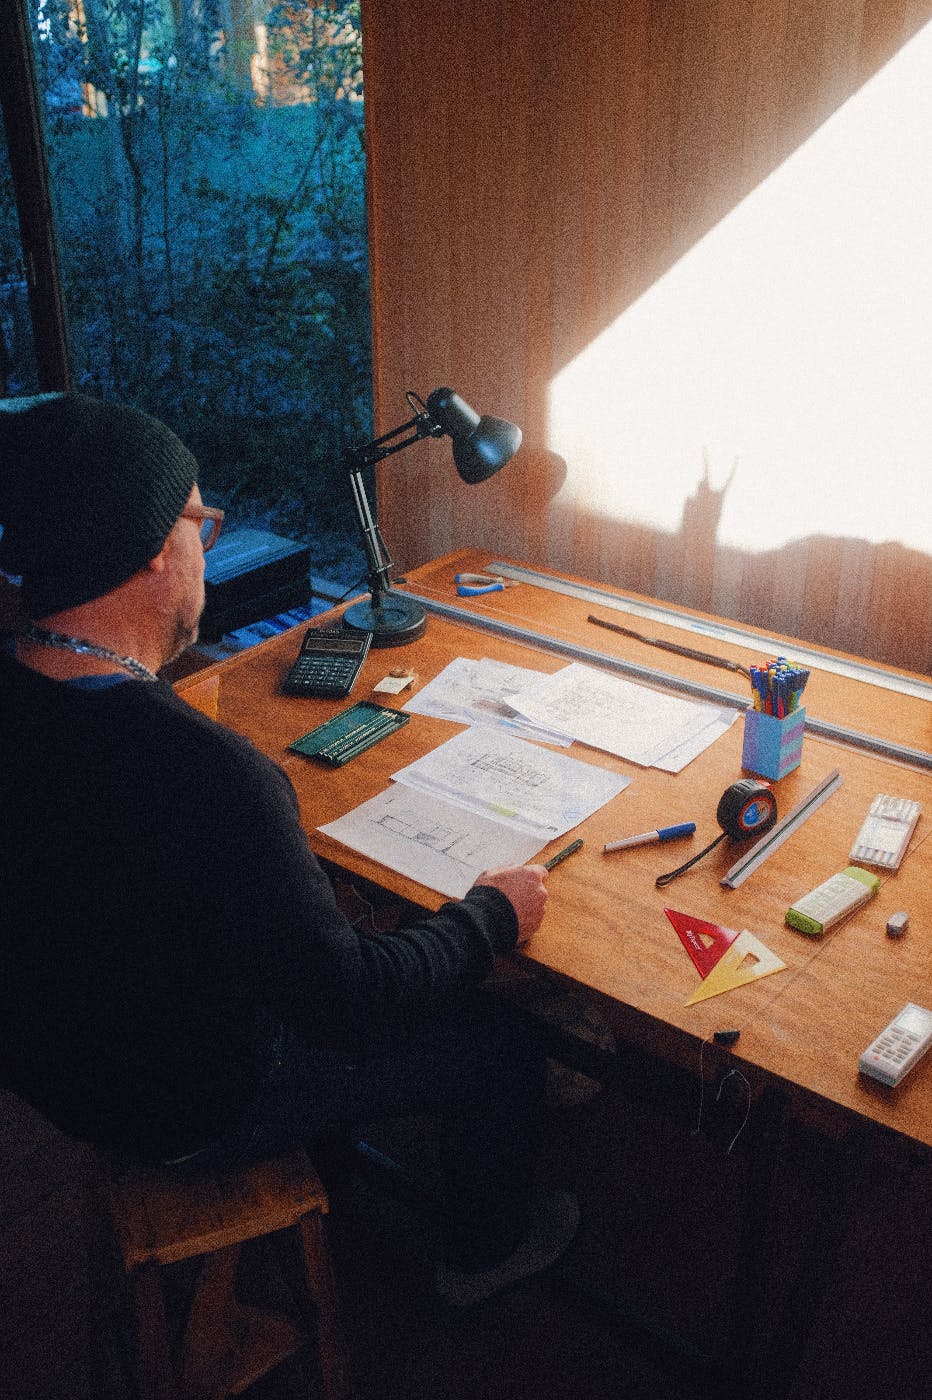 A designer in a black cap at his desk, design tools on the desk a desk lamp shines on the wall